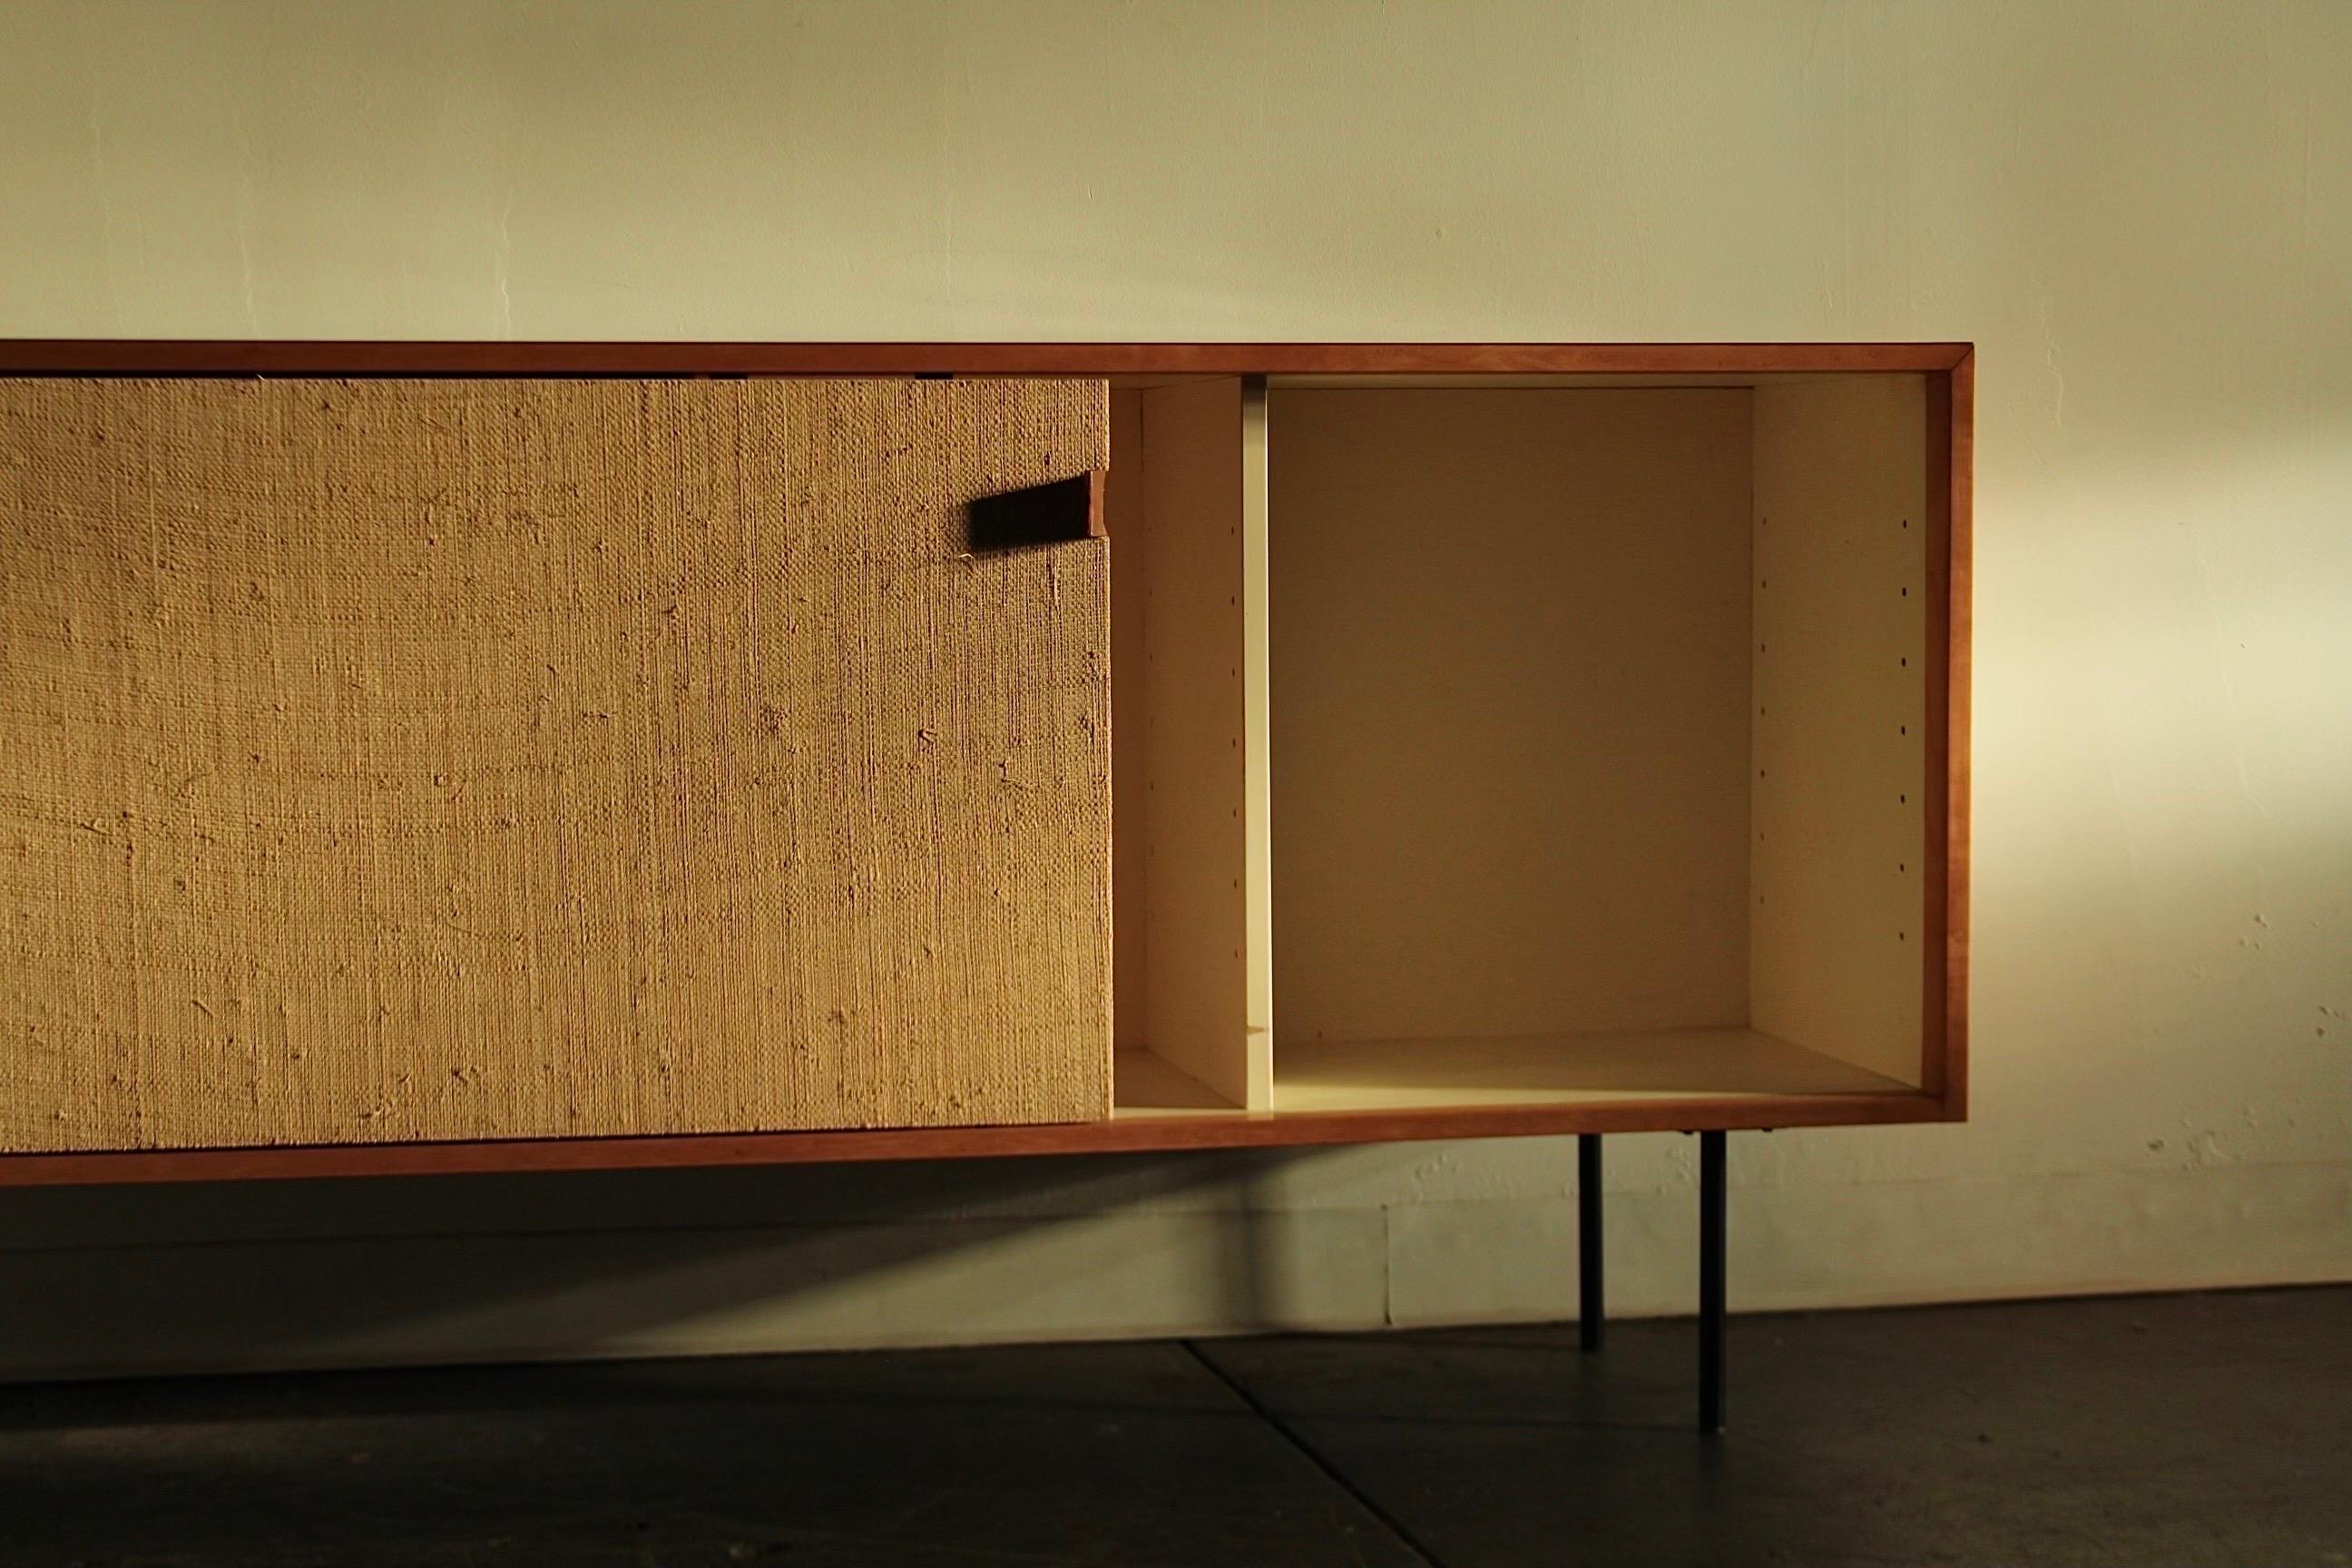 Grasscloth Florence Knoll 'Model 116' Iron Leg and Grass Cloth Credenza for Knoll, 1950s For Sale